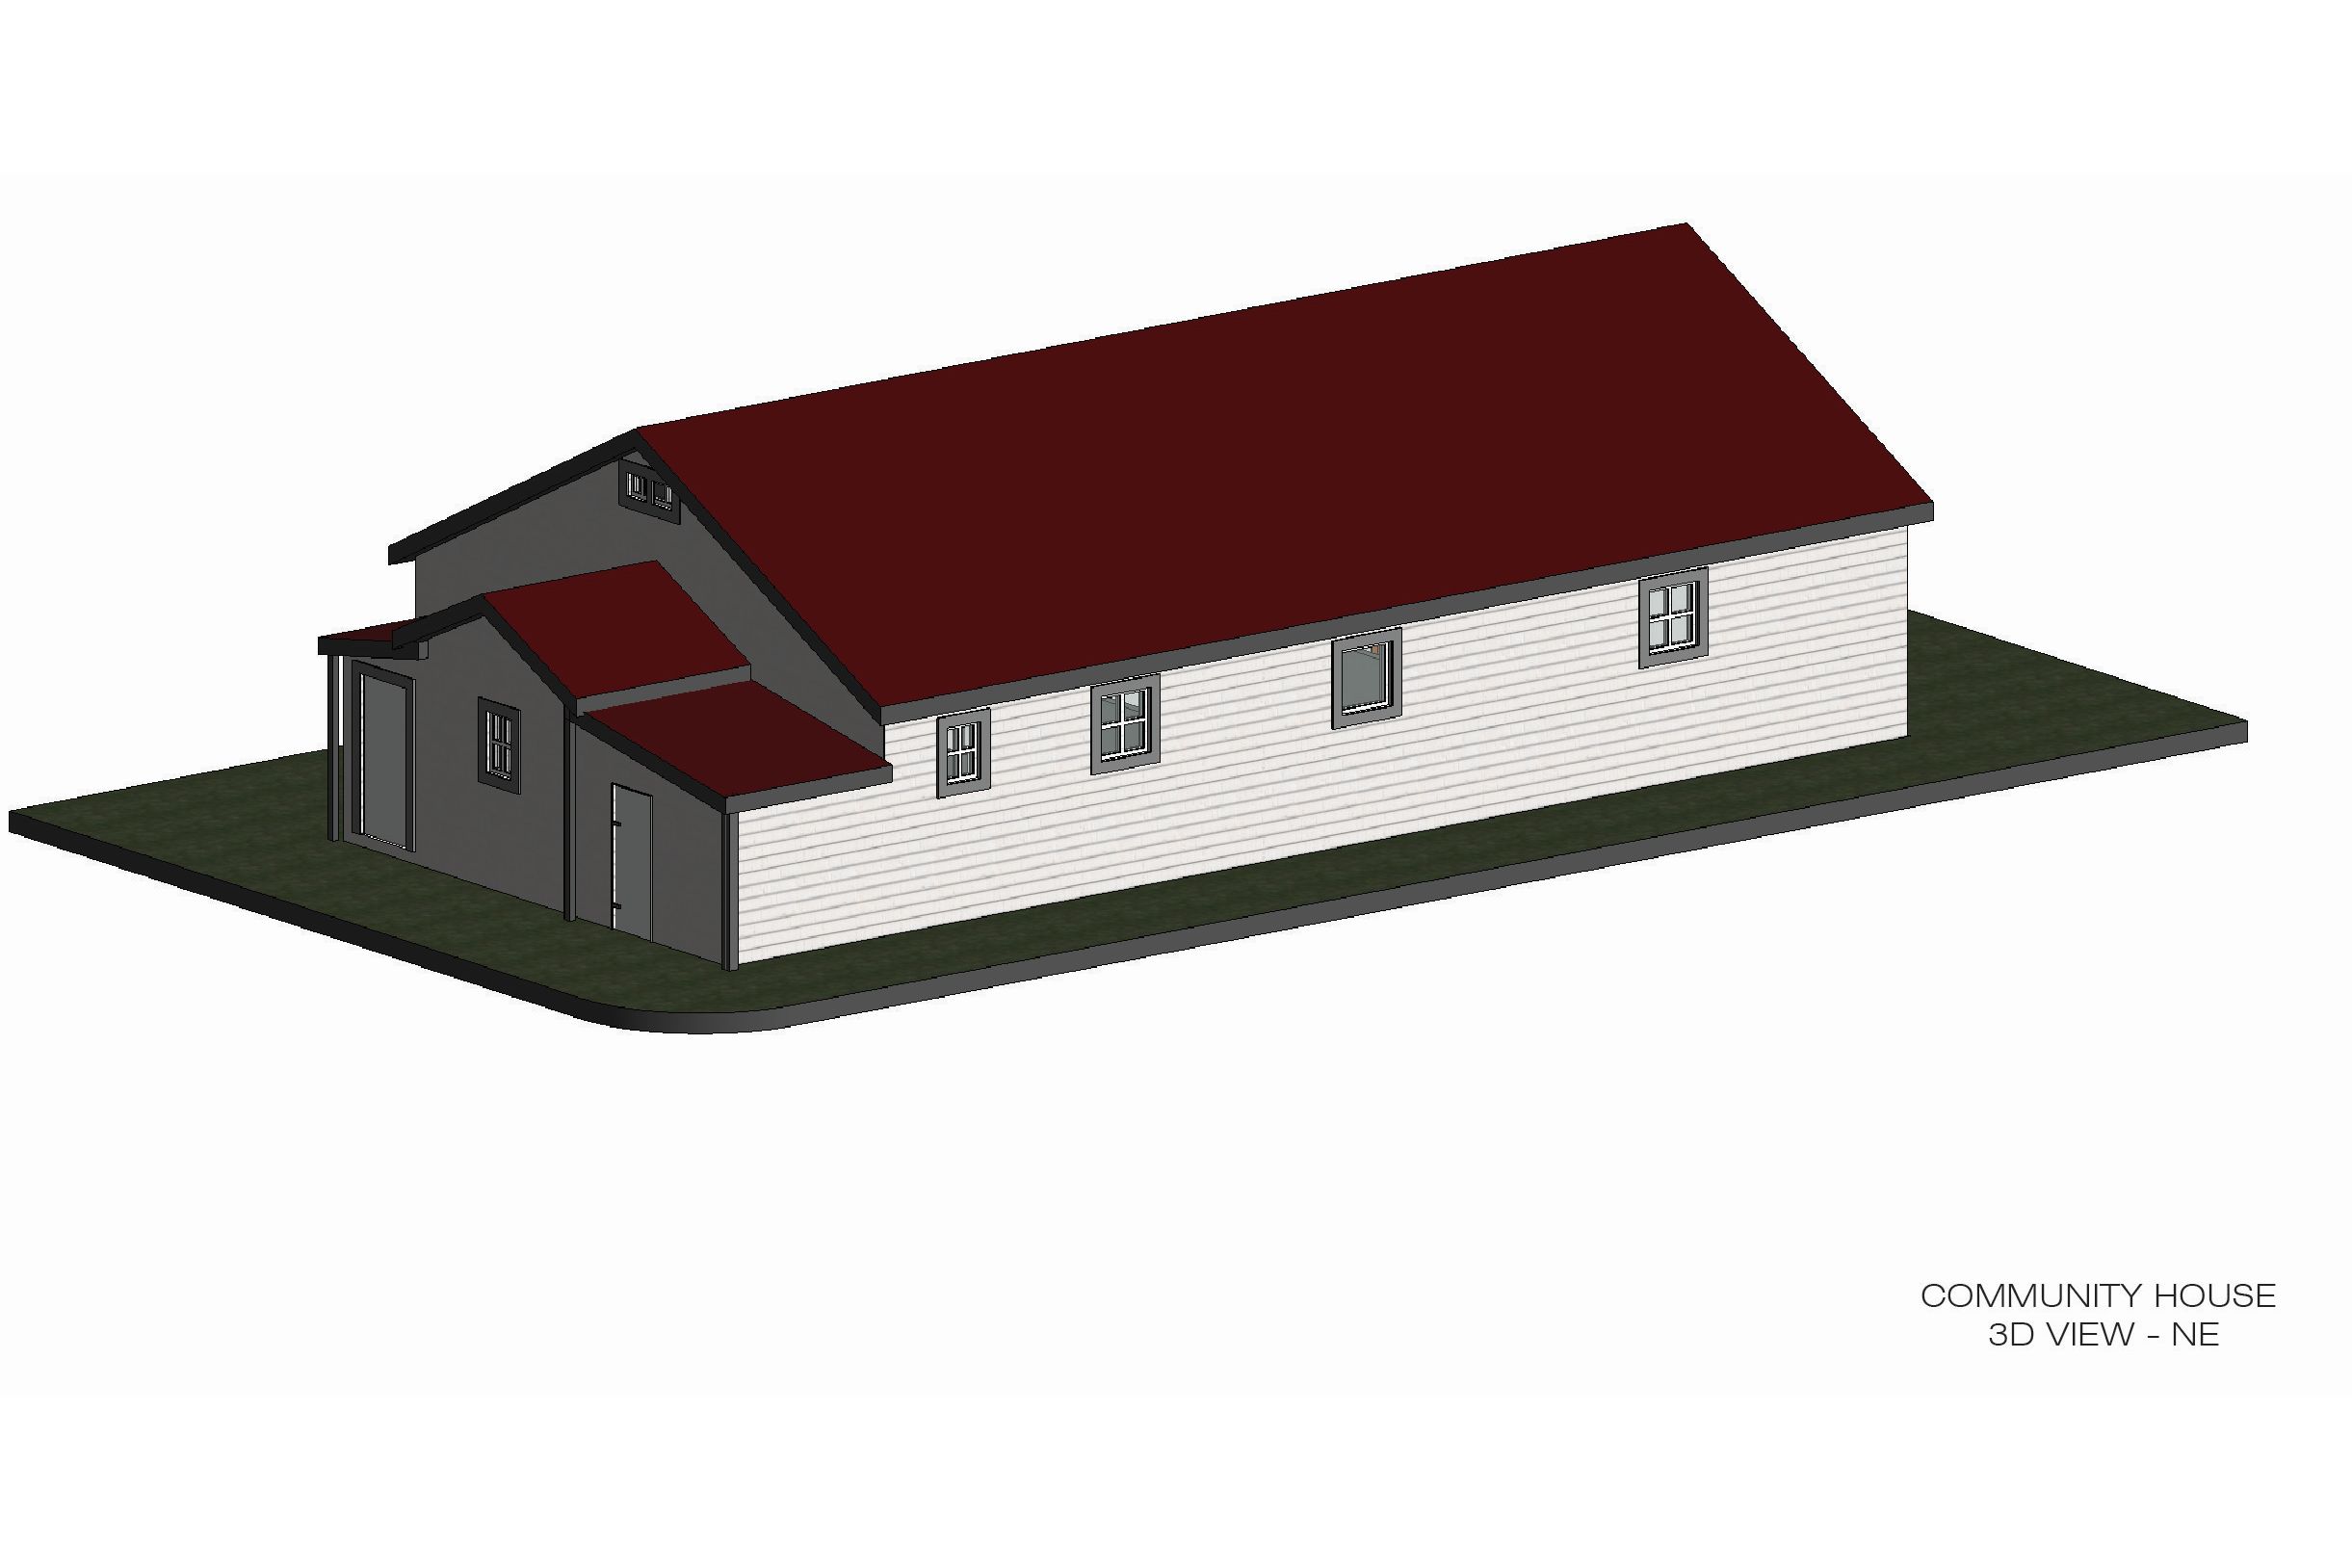 Northeast view of 3D model created in Revit from the laser scanning data collected of the community house.